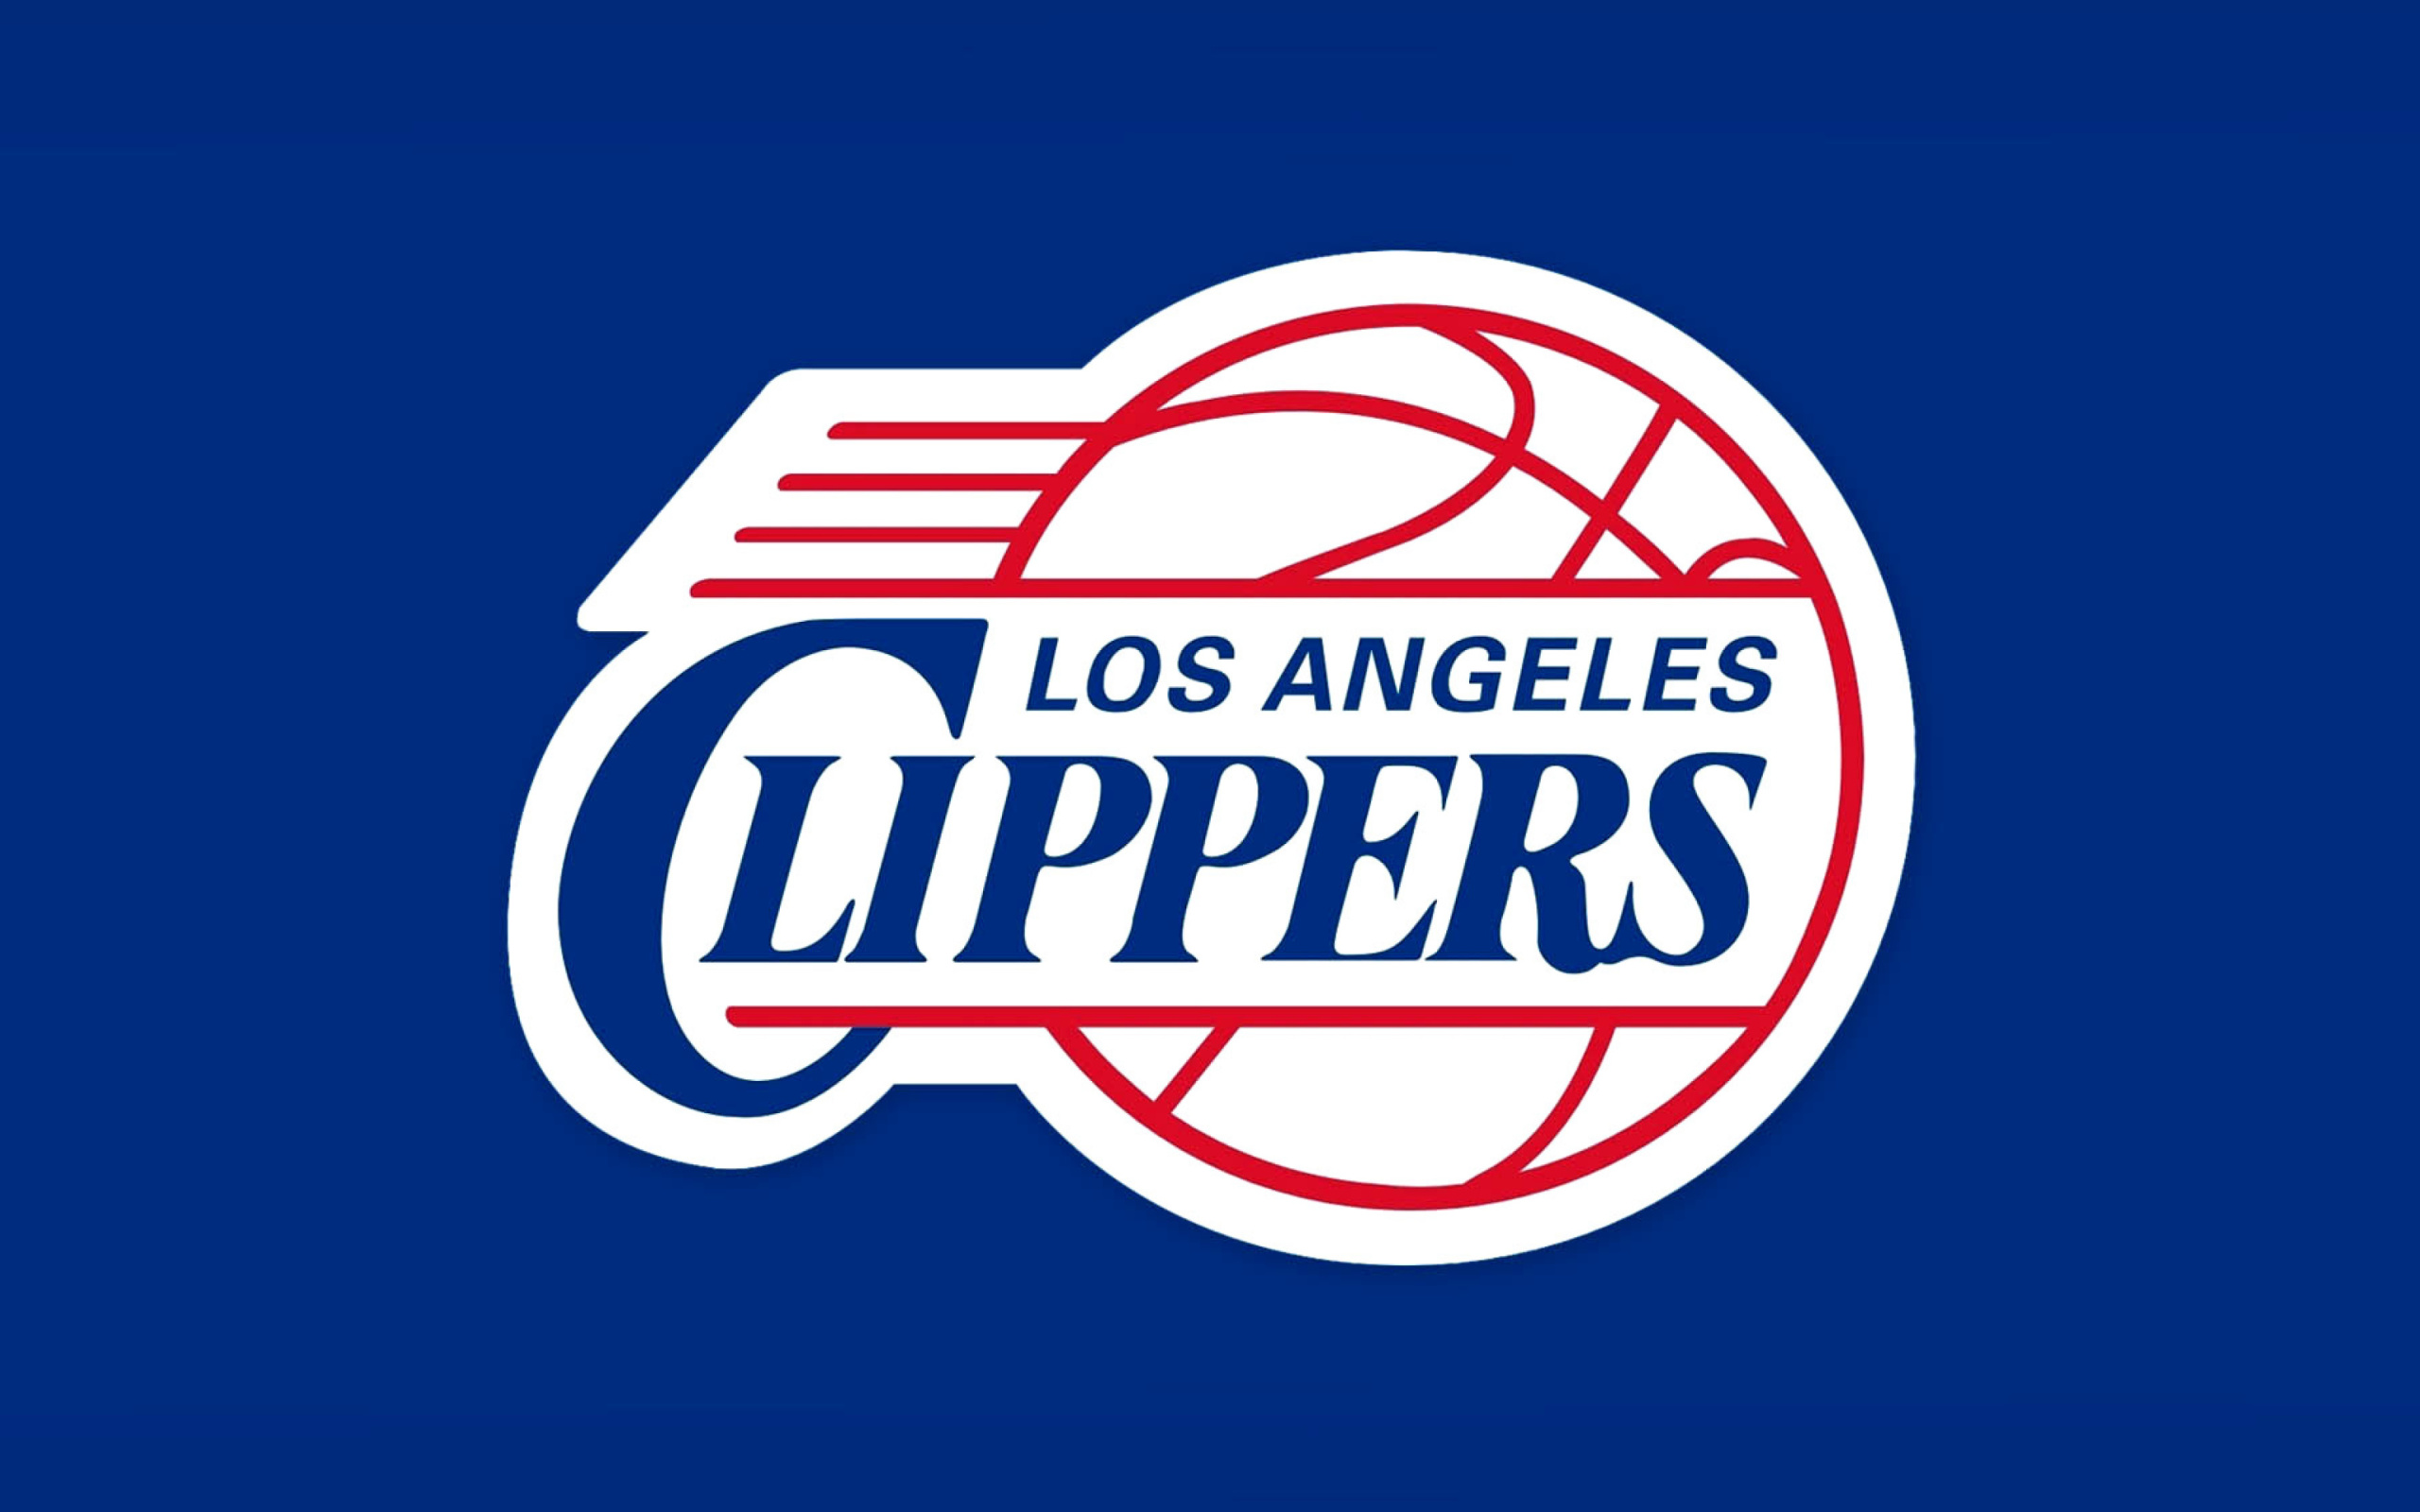 Los Angeles Clippers wallpaper 2560x1600